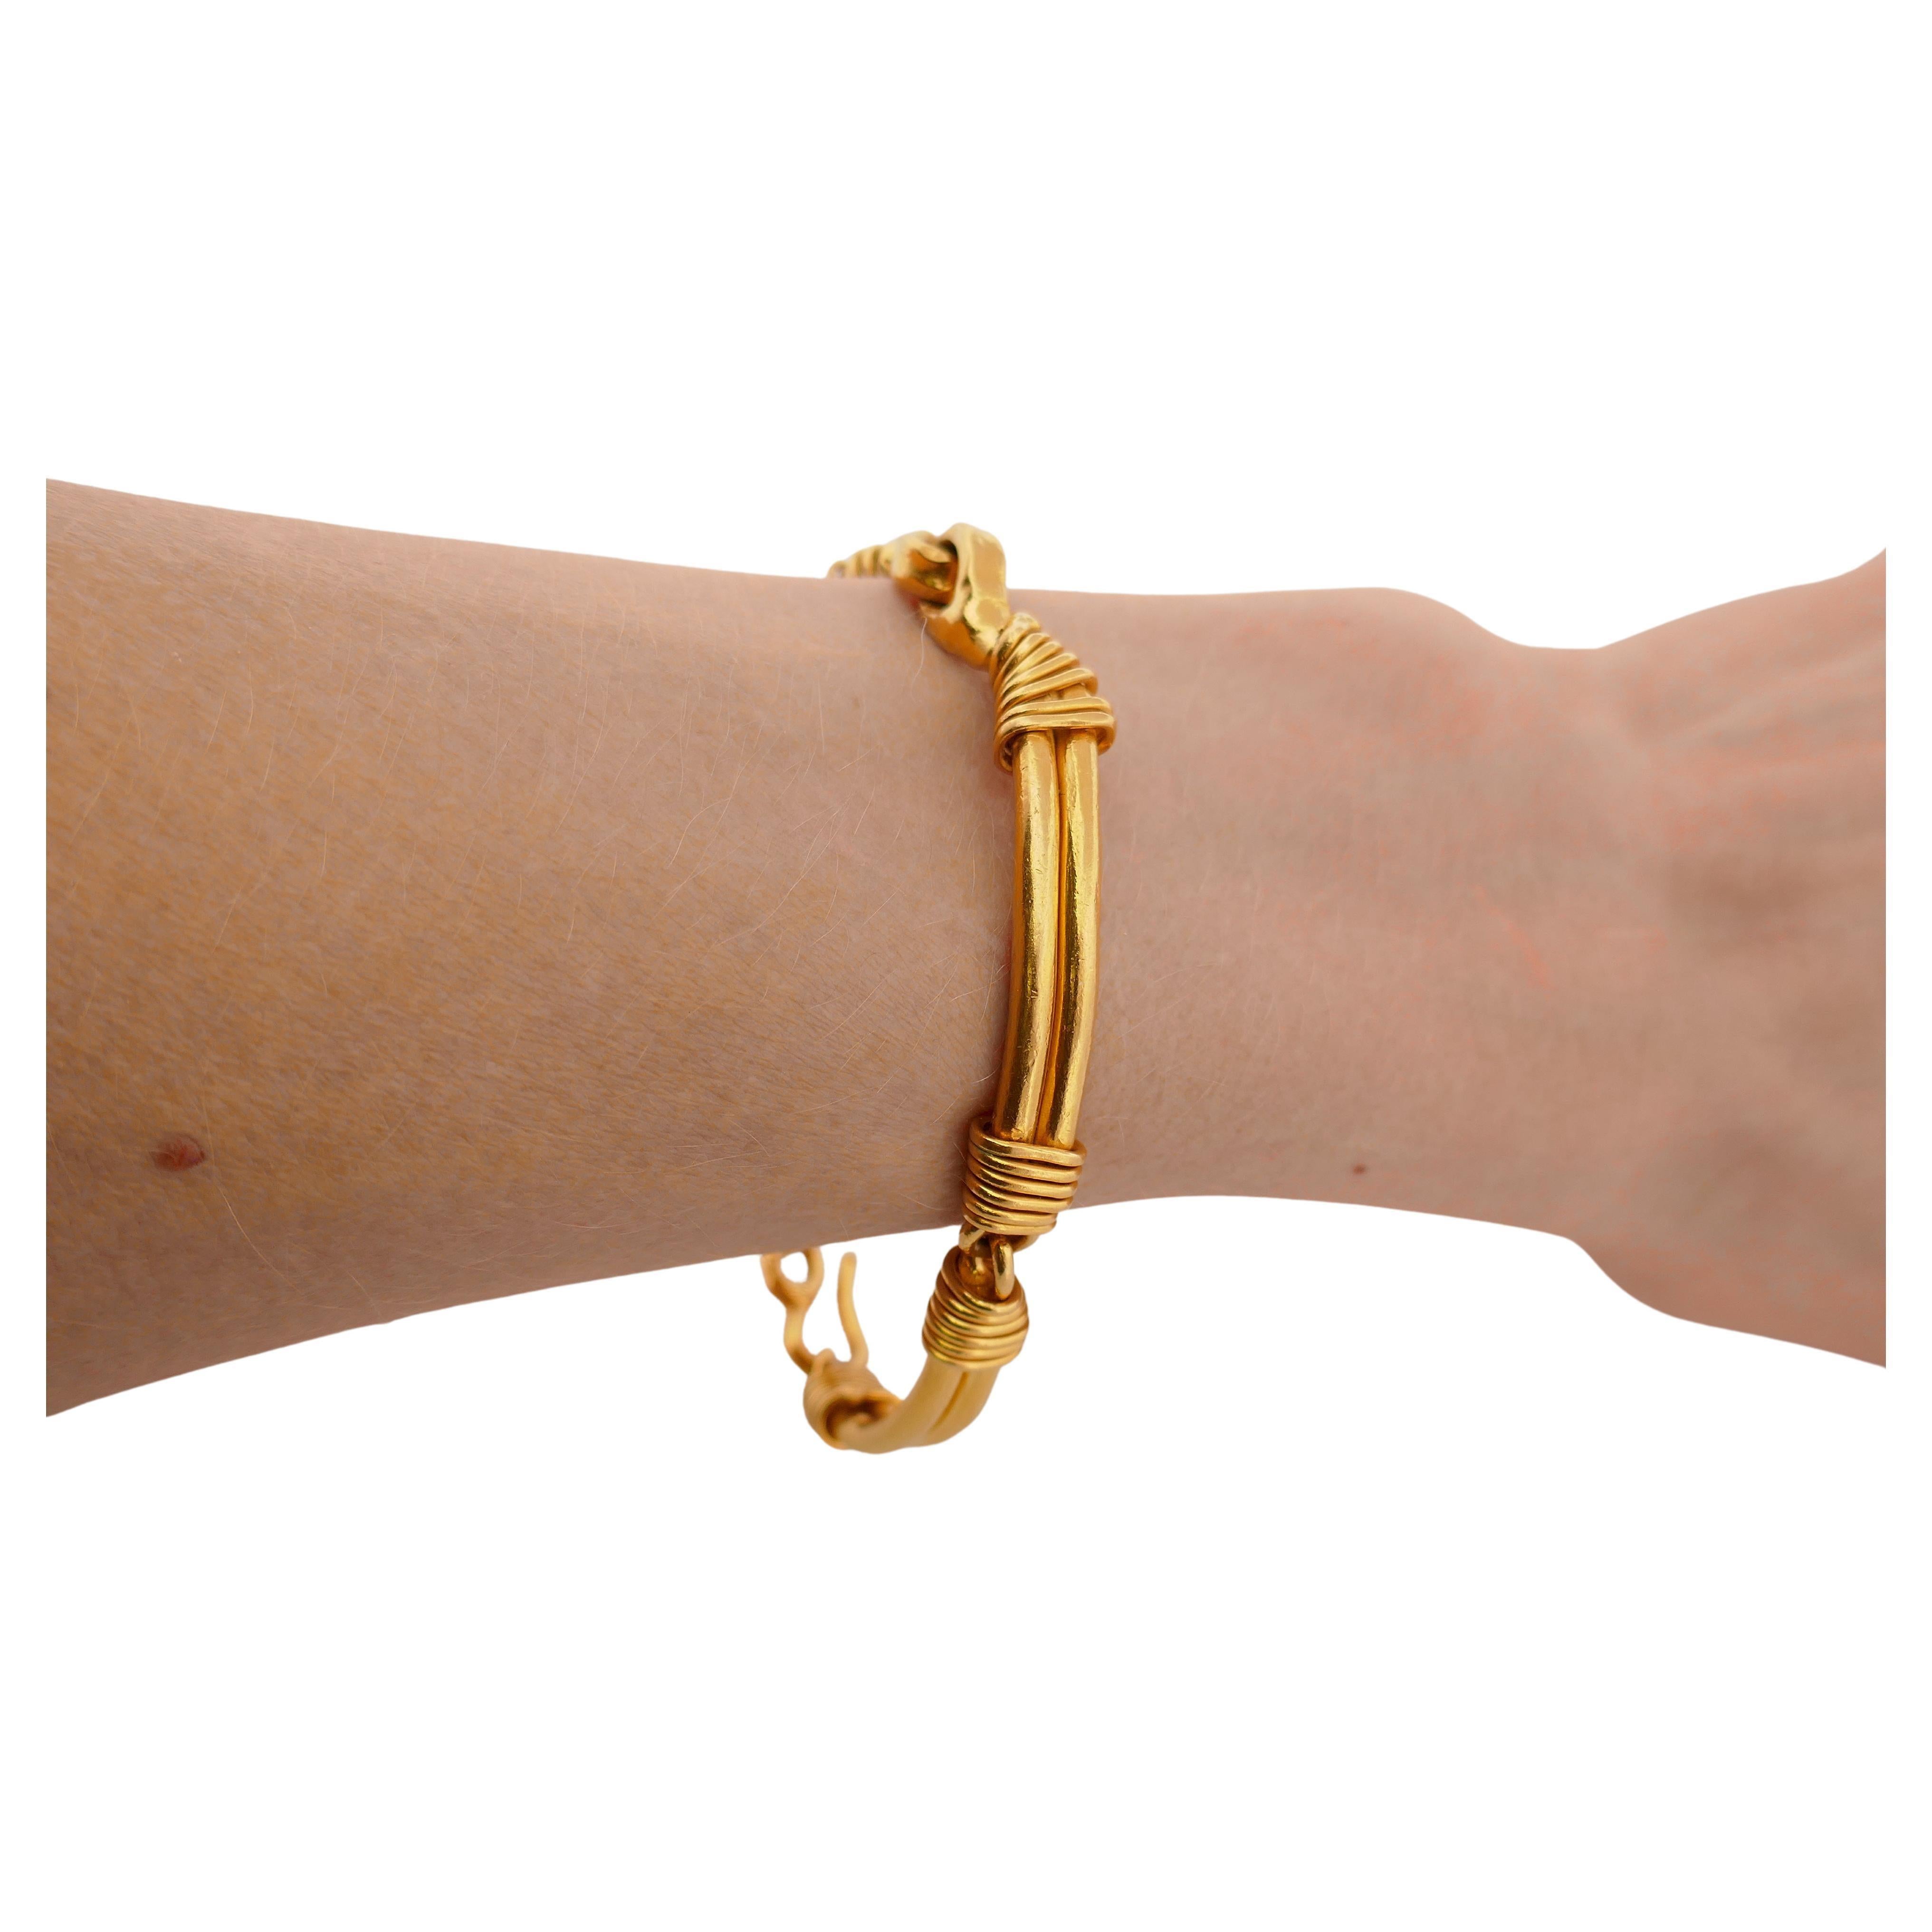 An exquisite 22k gold bracelet by Jean Mahie.
The bracelet is designed as a bar link bracelet with loop connections. The bars are irregular size that conveys a freedom and spontaneous nature of art. The gold wires wrapped around the bars add to the